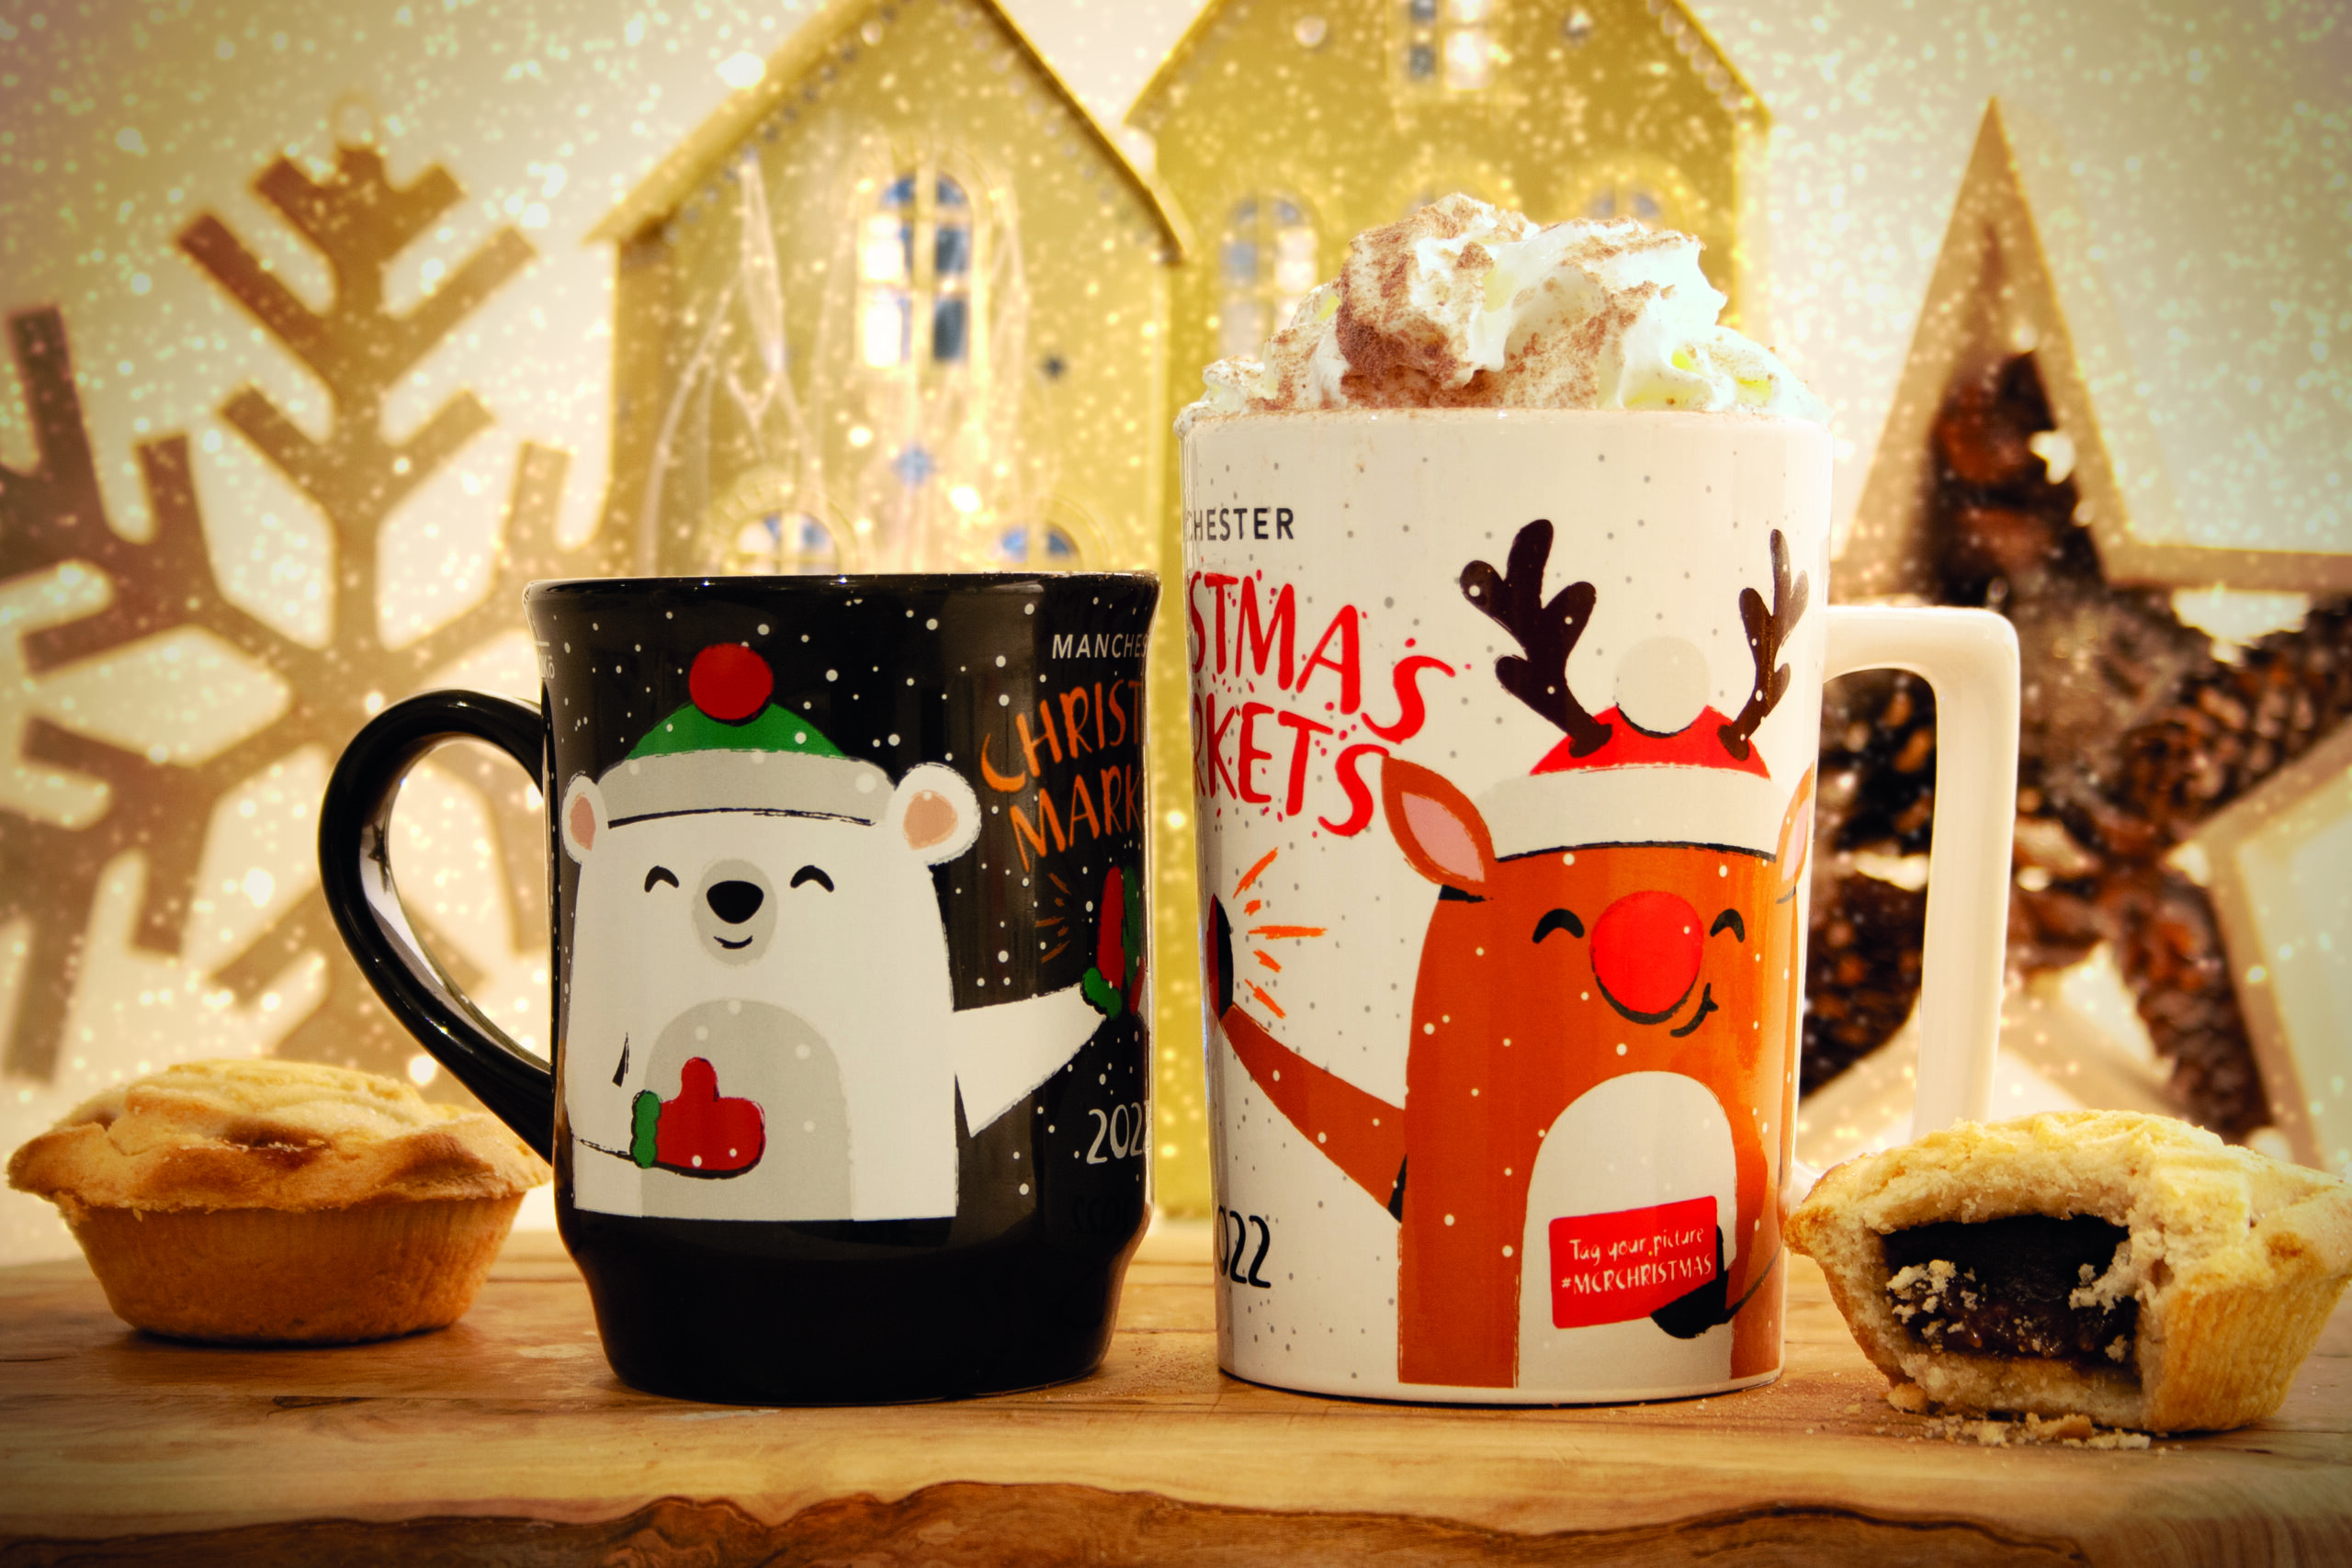 The 2022 Manchester Christmas Markets mugs. Credit: Manchester City Council